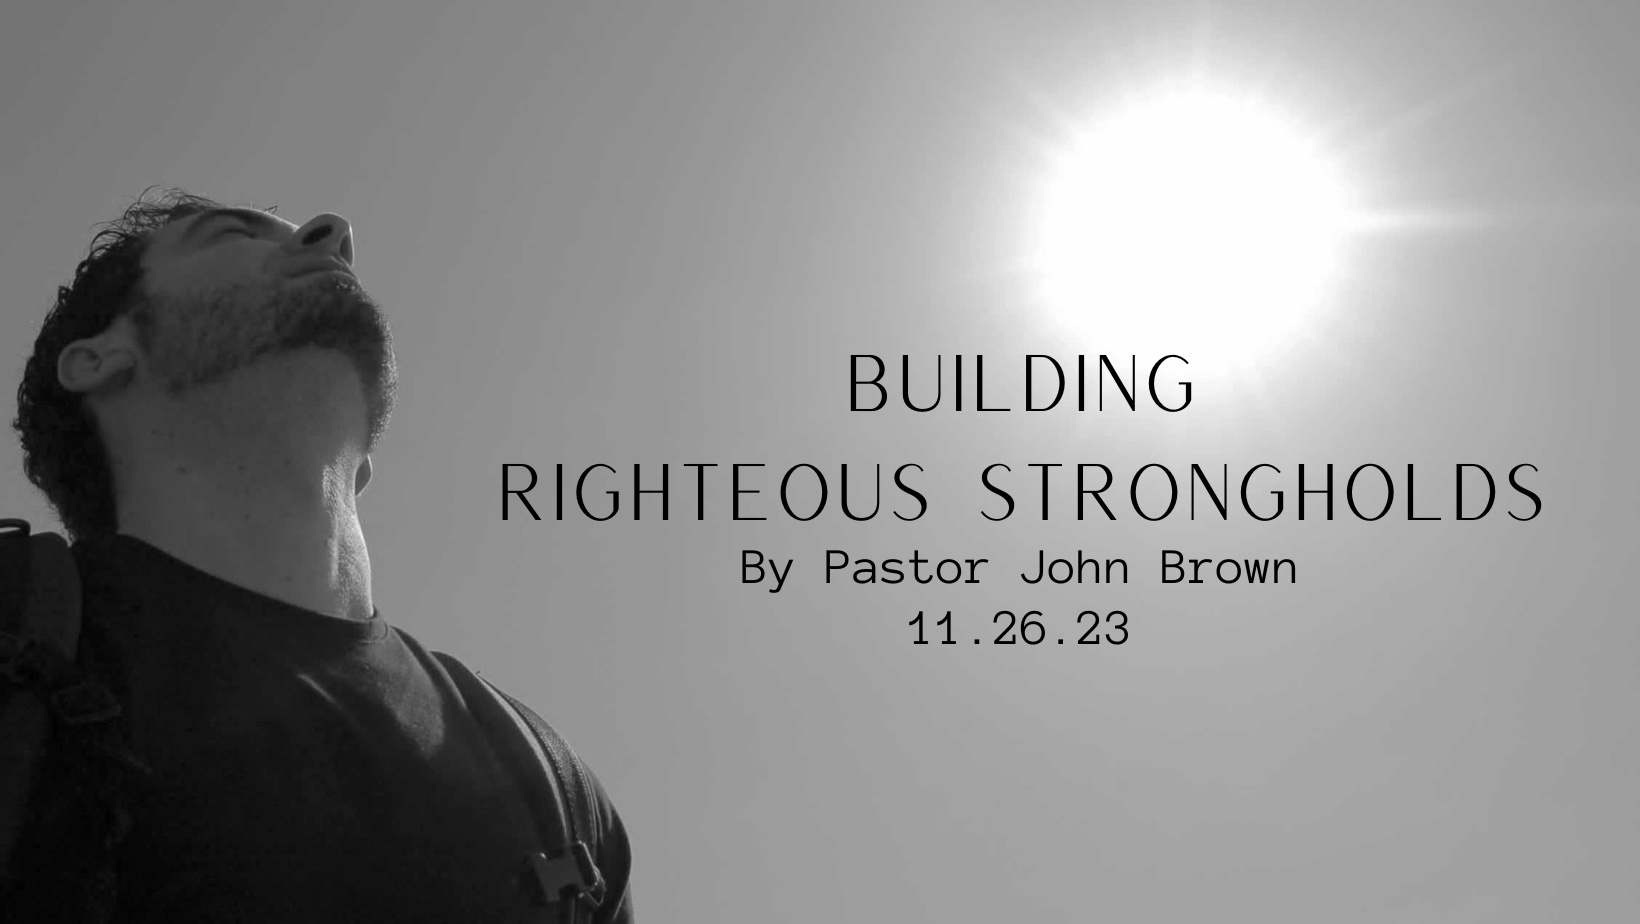 Building Righteous Strongholds